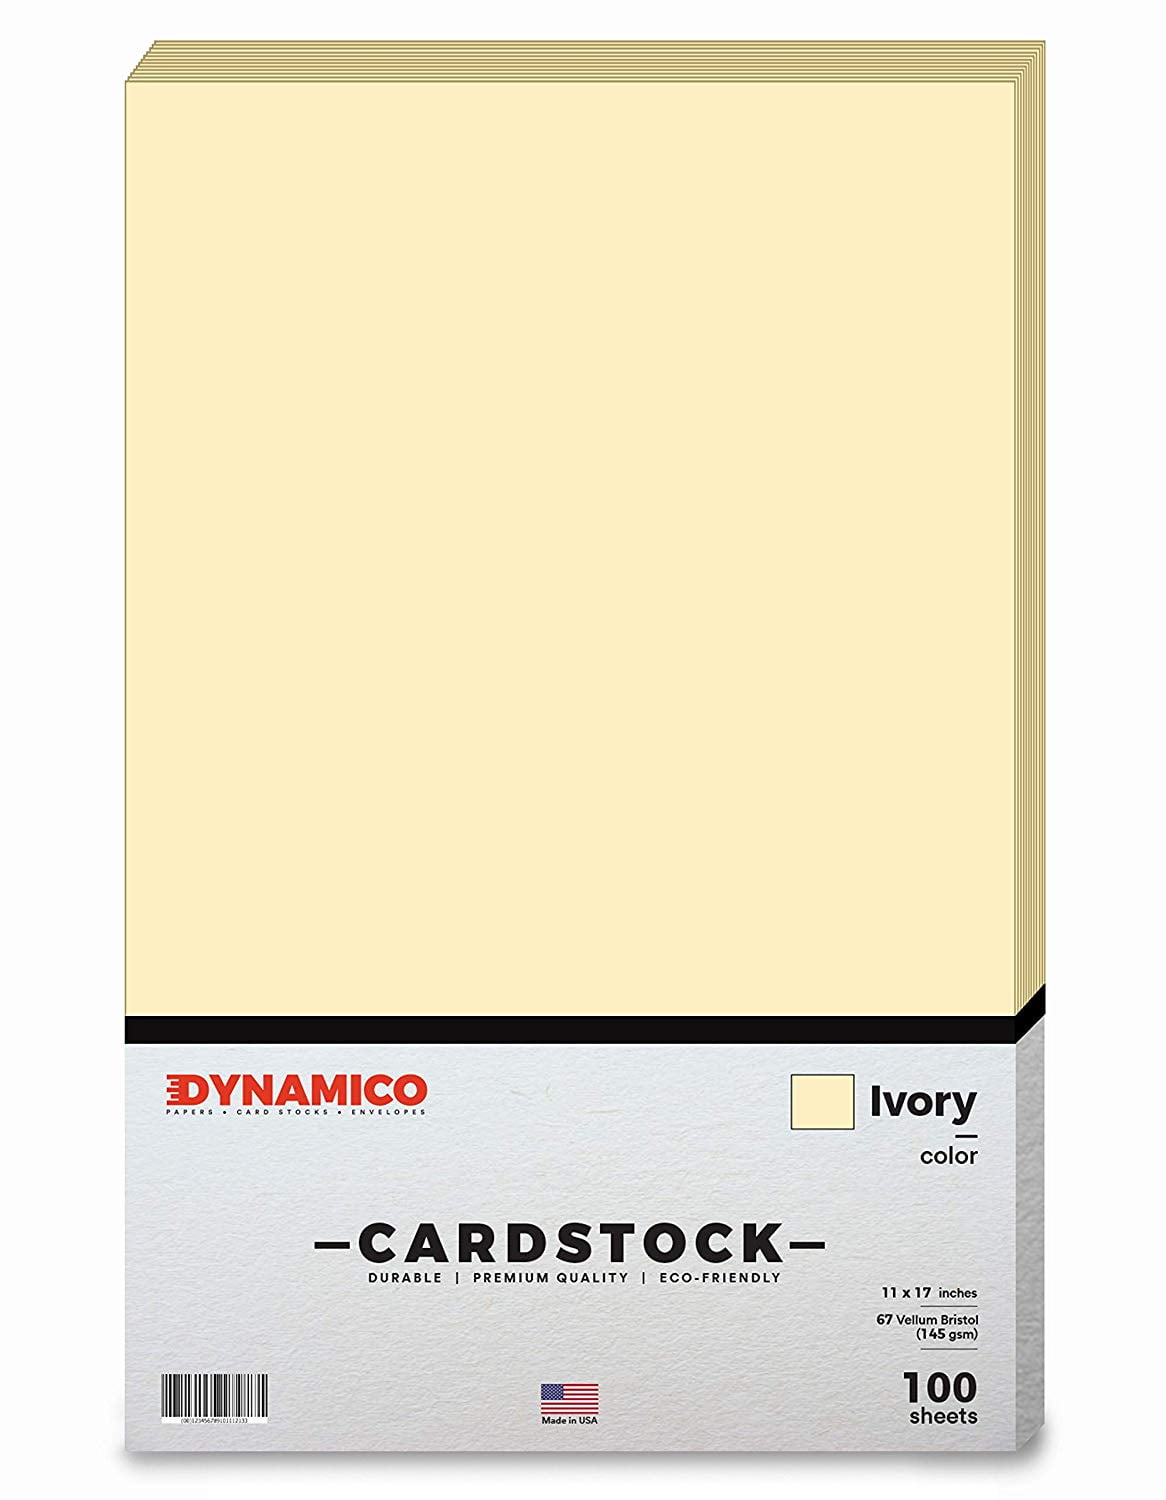 Ivory 11 x 17 Pastel Color Cardstock Paper - for Cards and